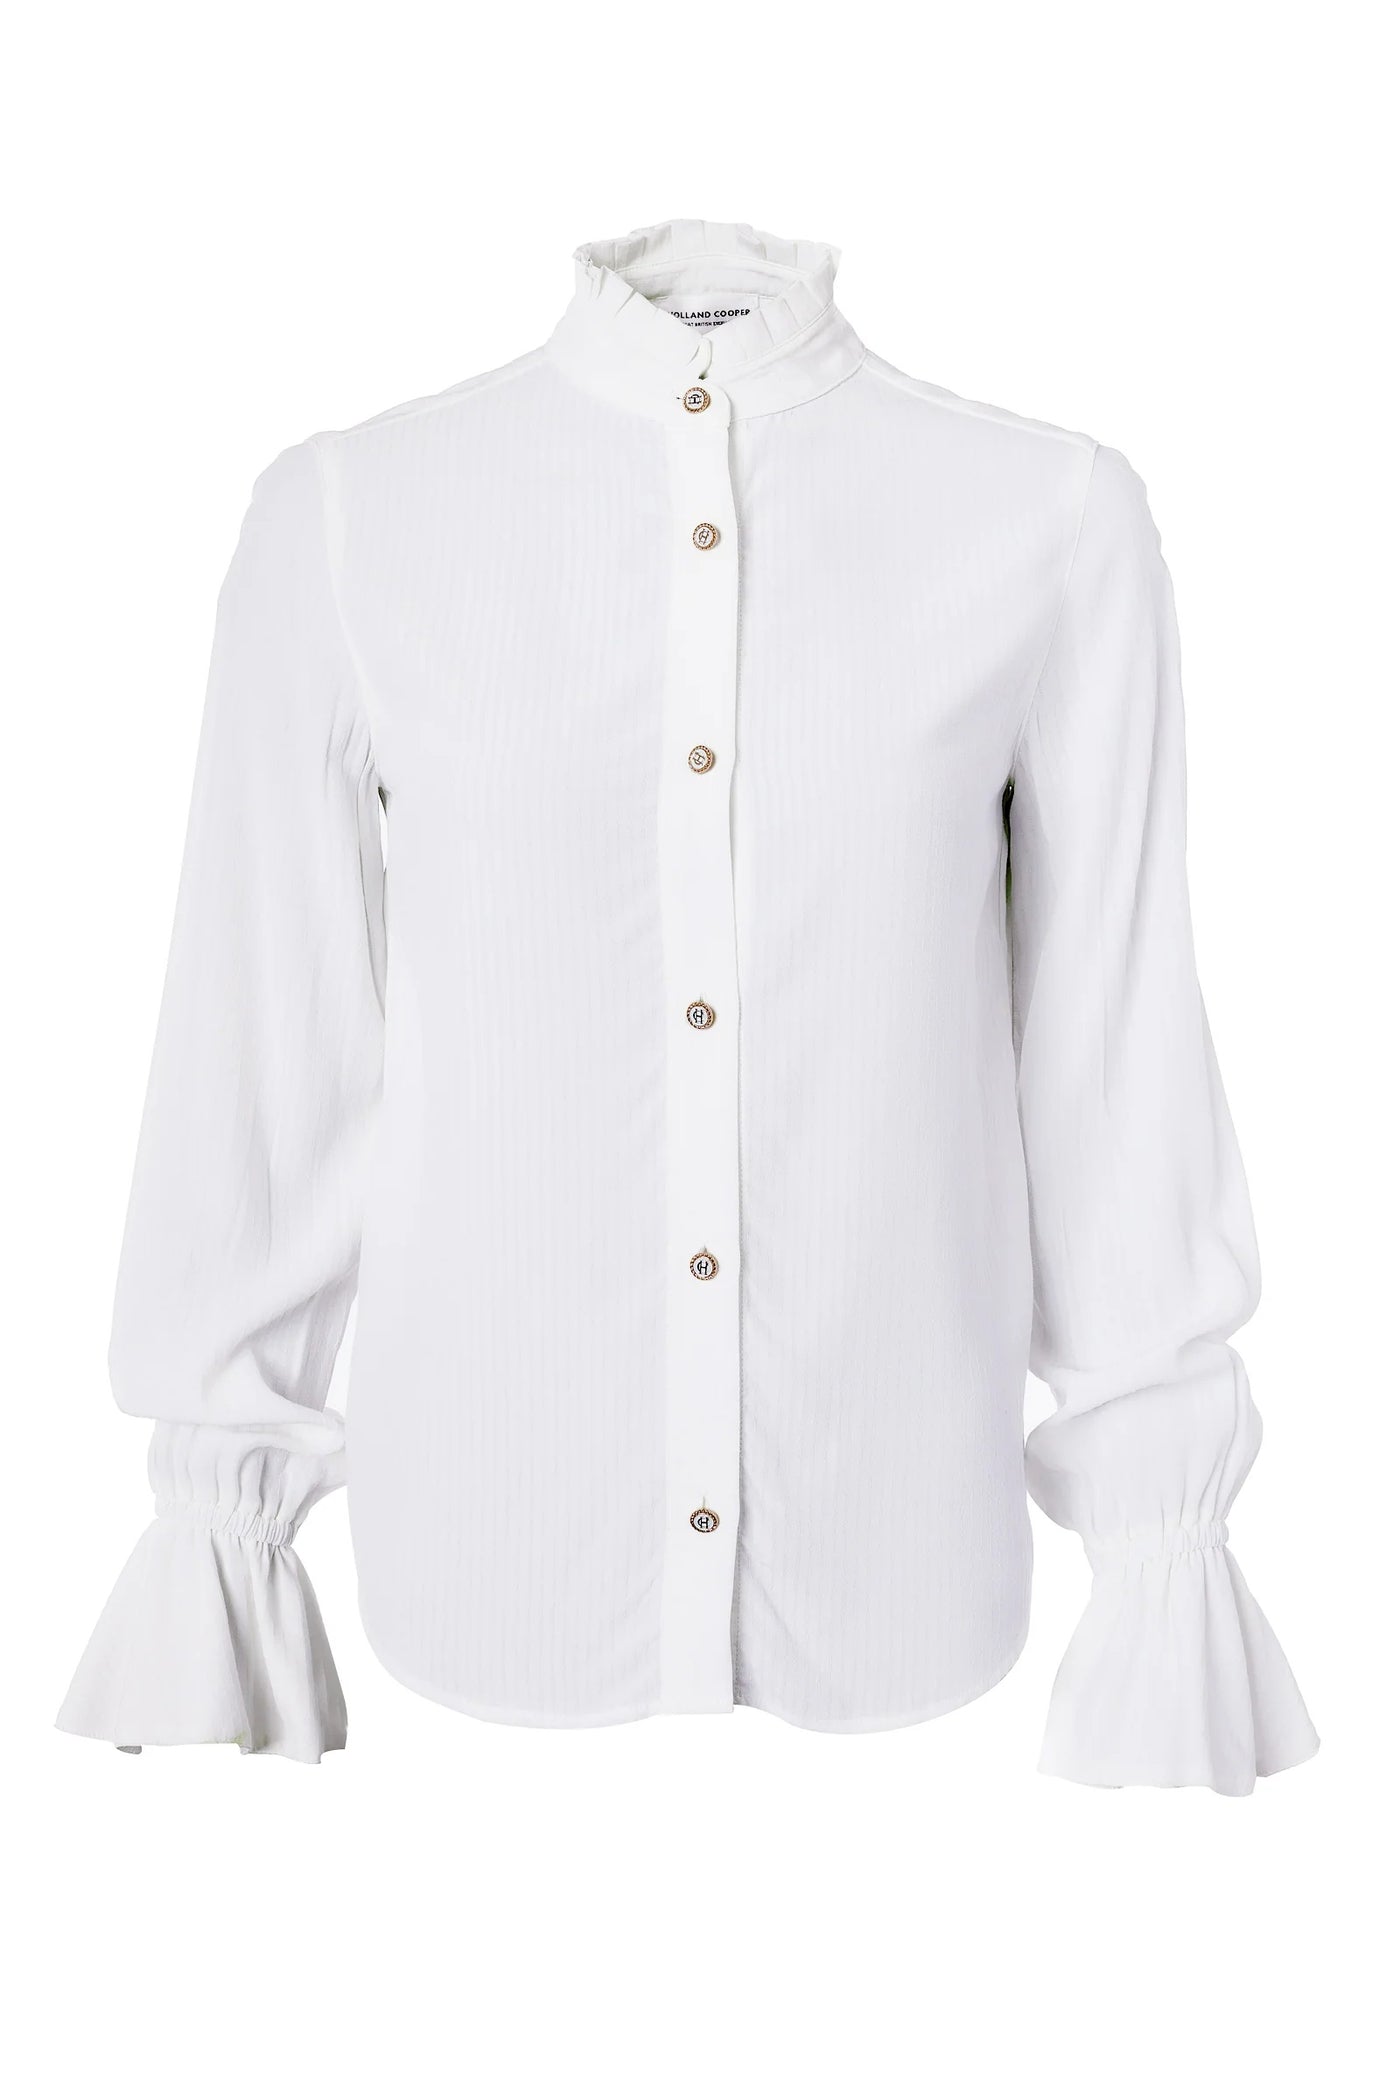 Holland Cooper Lilibet Shirt in White Front